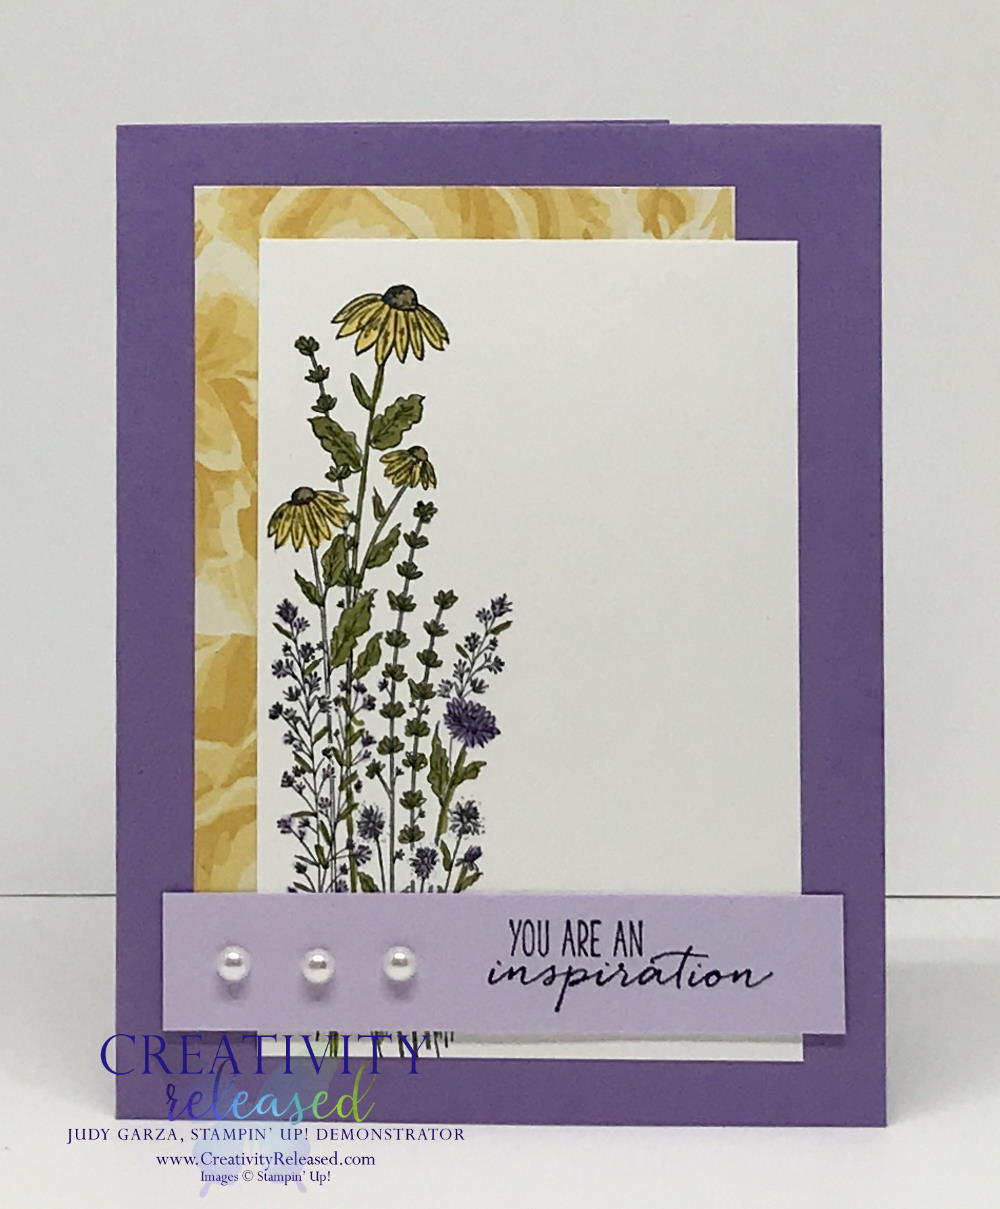 An uplifting card made with the Dragonfly Garden stamp set by Stampin' Up! using purples and yellows.